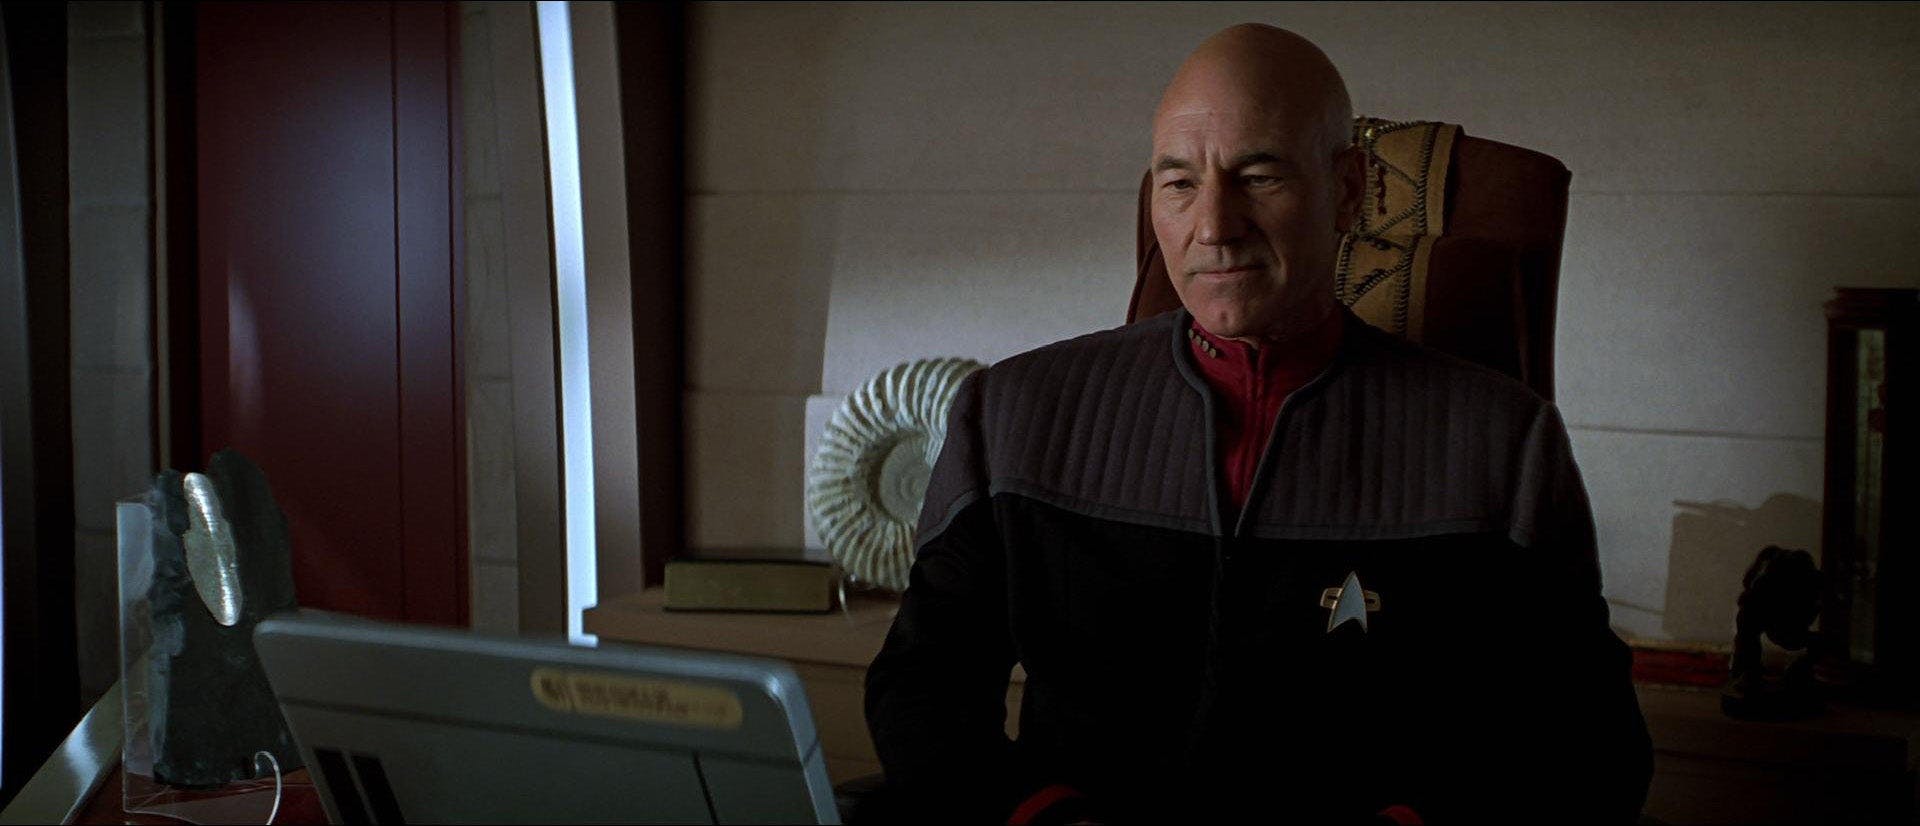 Picard listens to Berlioz before preparing for battle in Star Trek: First Contact